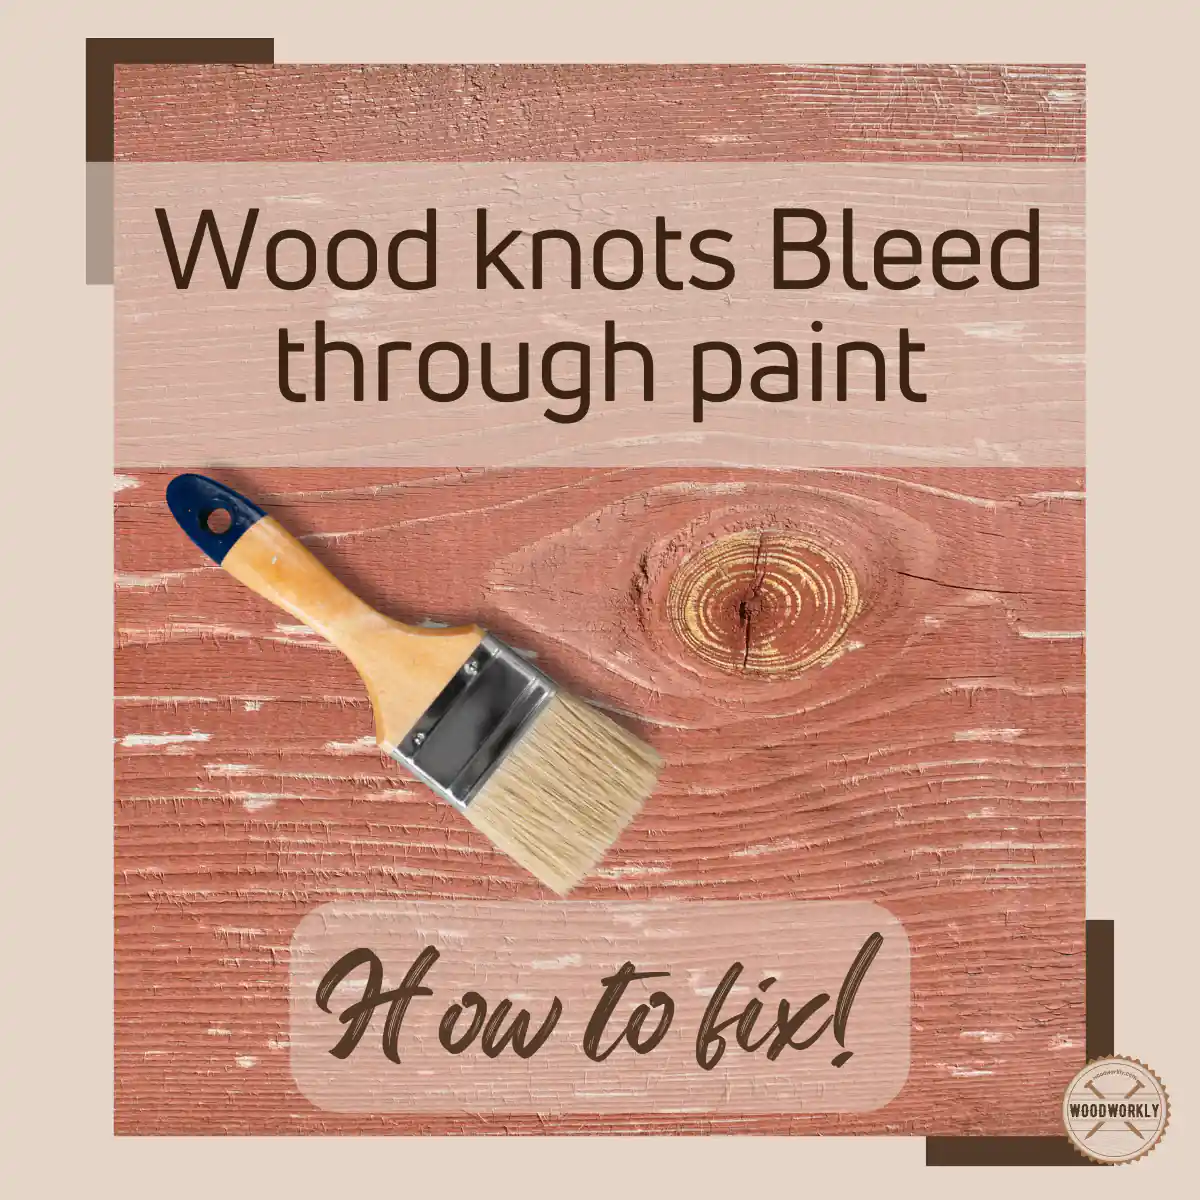 How To Stop Knots From Bleeding Through Paint